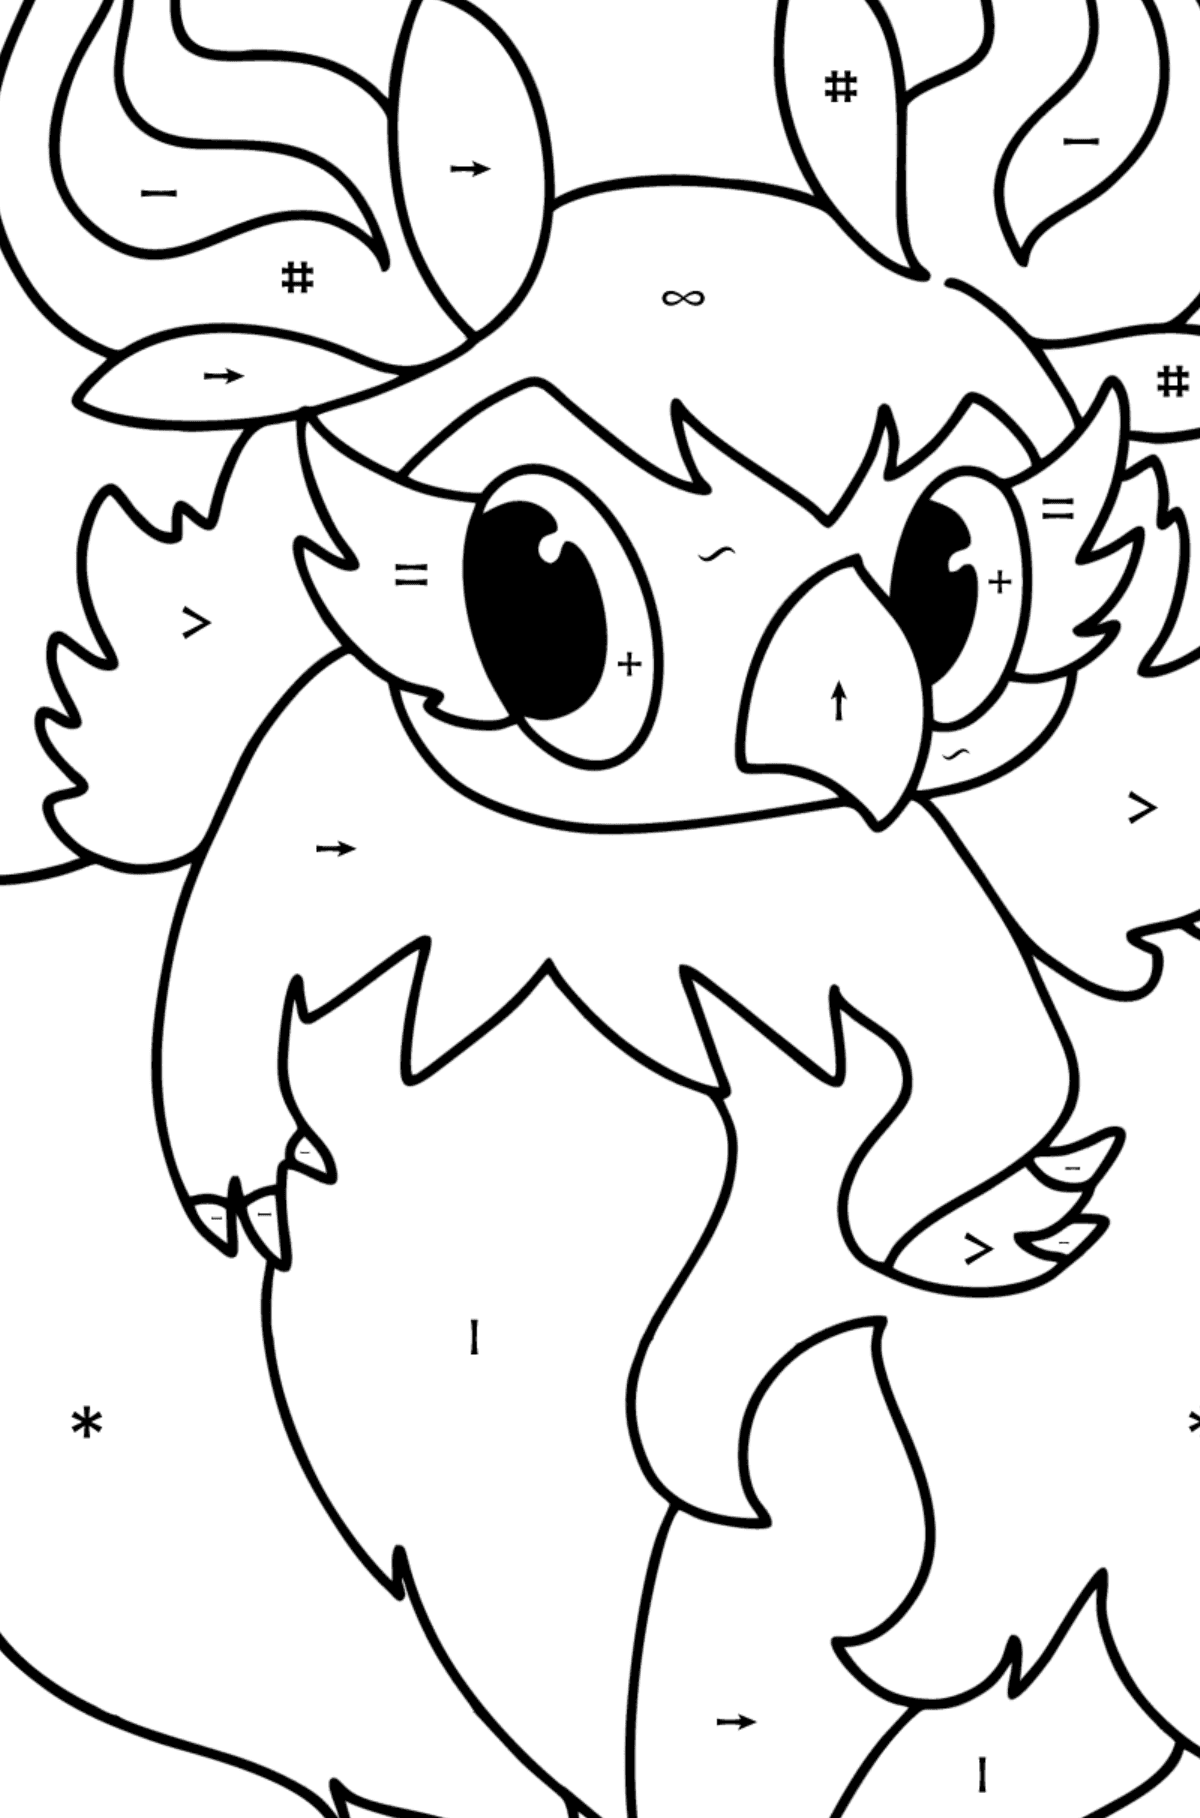 Colouring page Pokémon X and Y Aromatisse - Coloring by Symbols for Kids